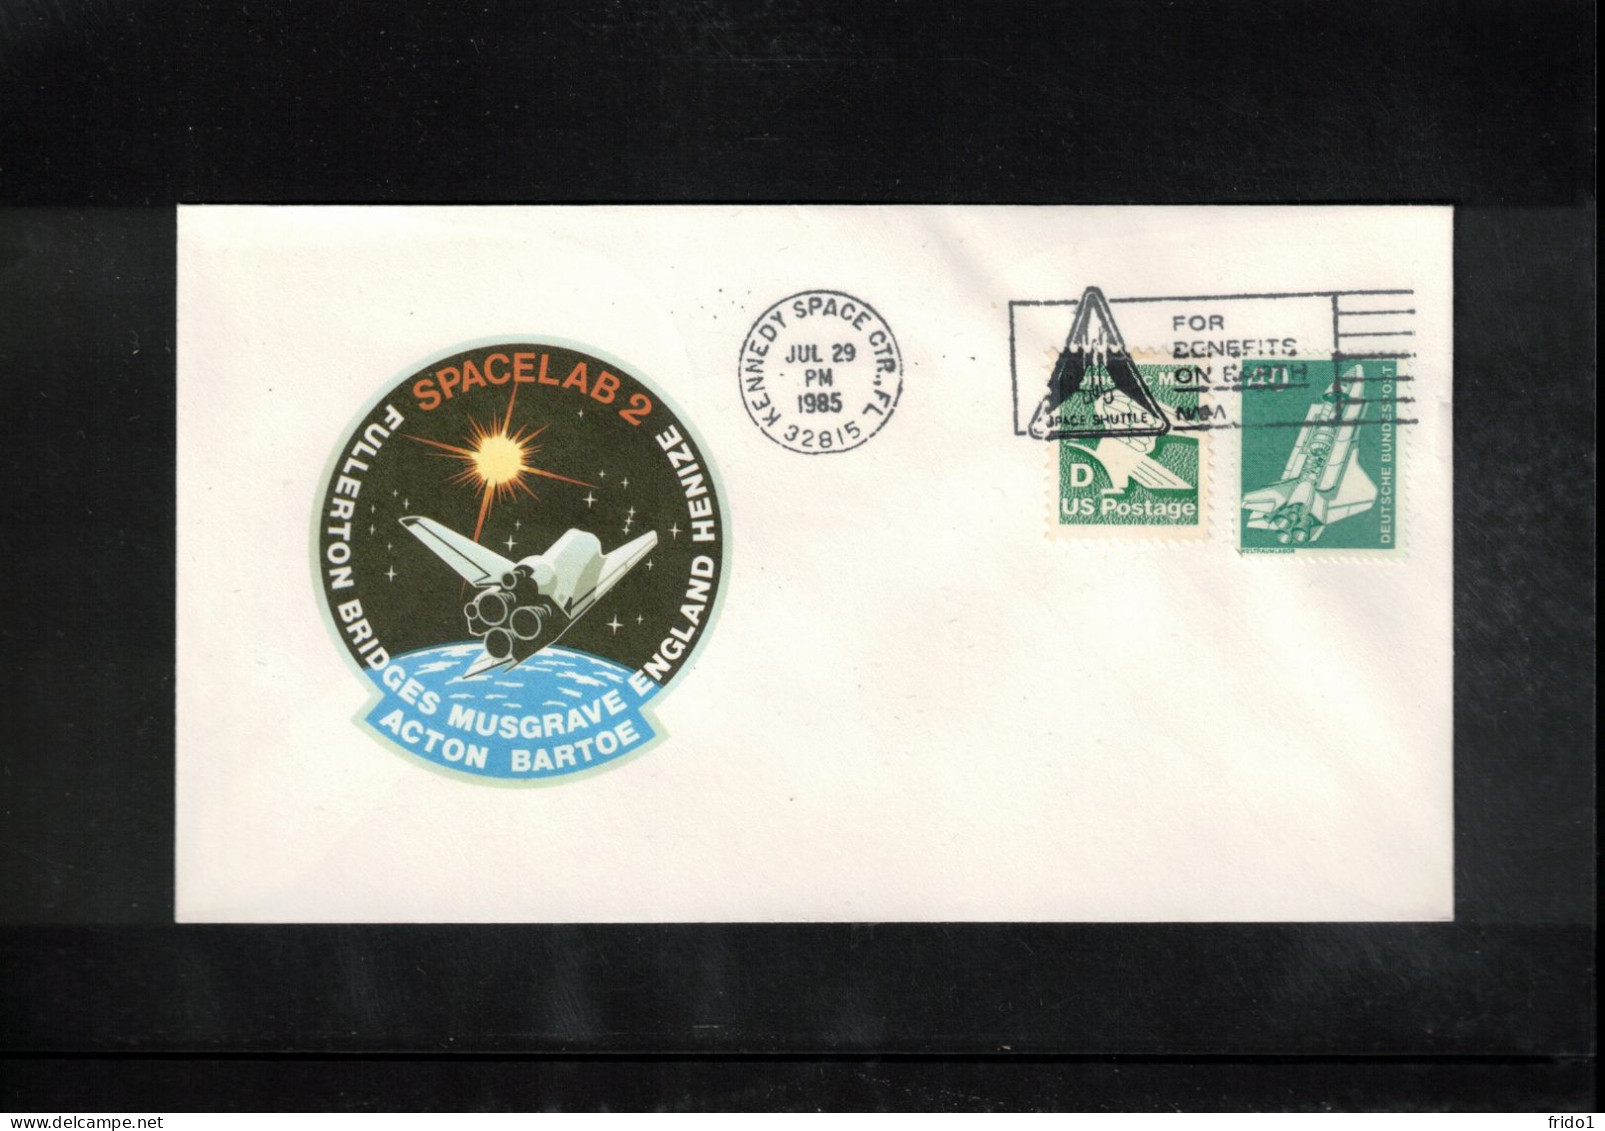 USA + Germany 1985 Space / Weltraum Space Shuttle + Spacelab 2 Interesting Cover - Etats-Unis